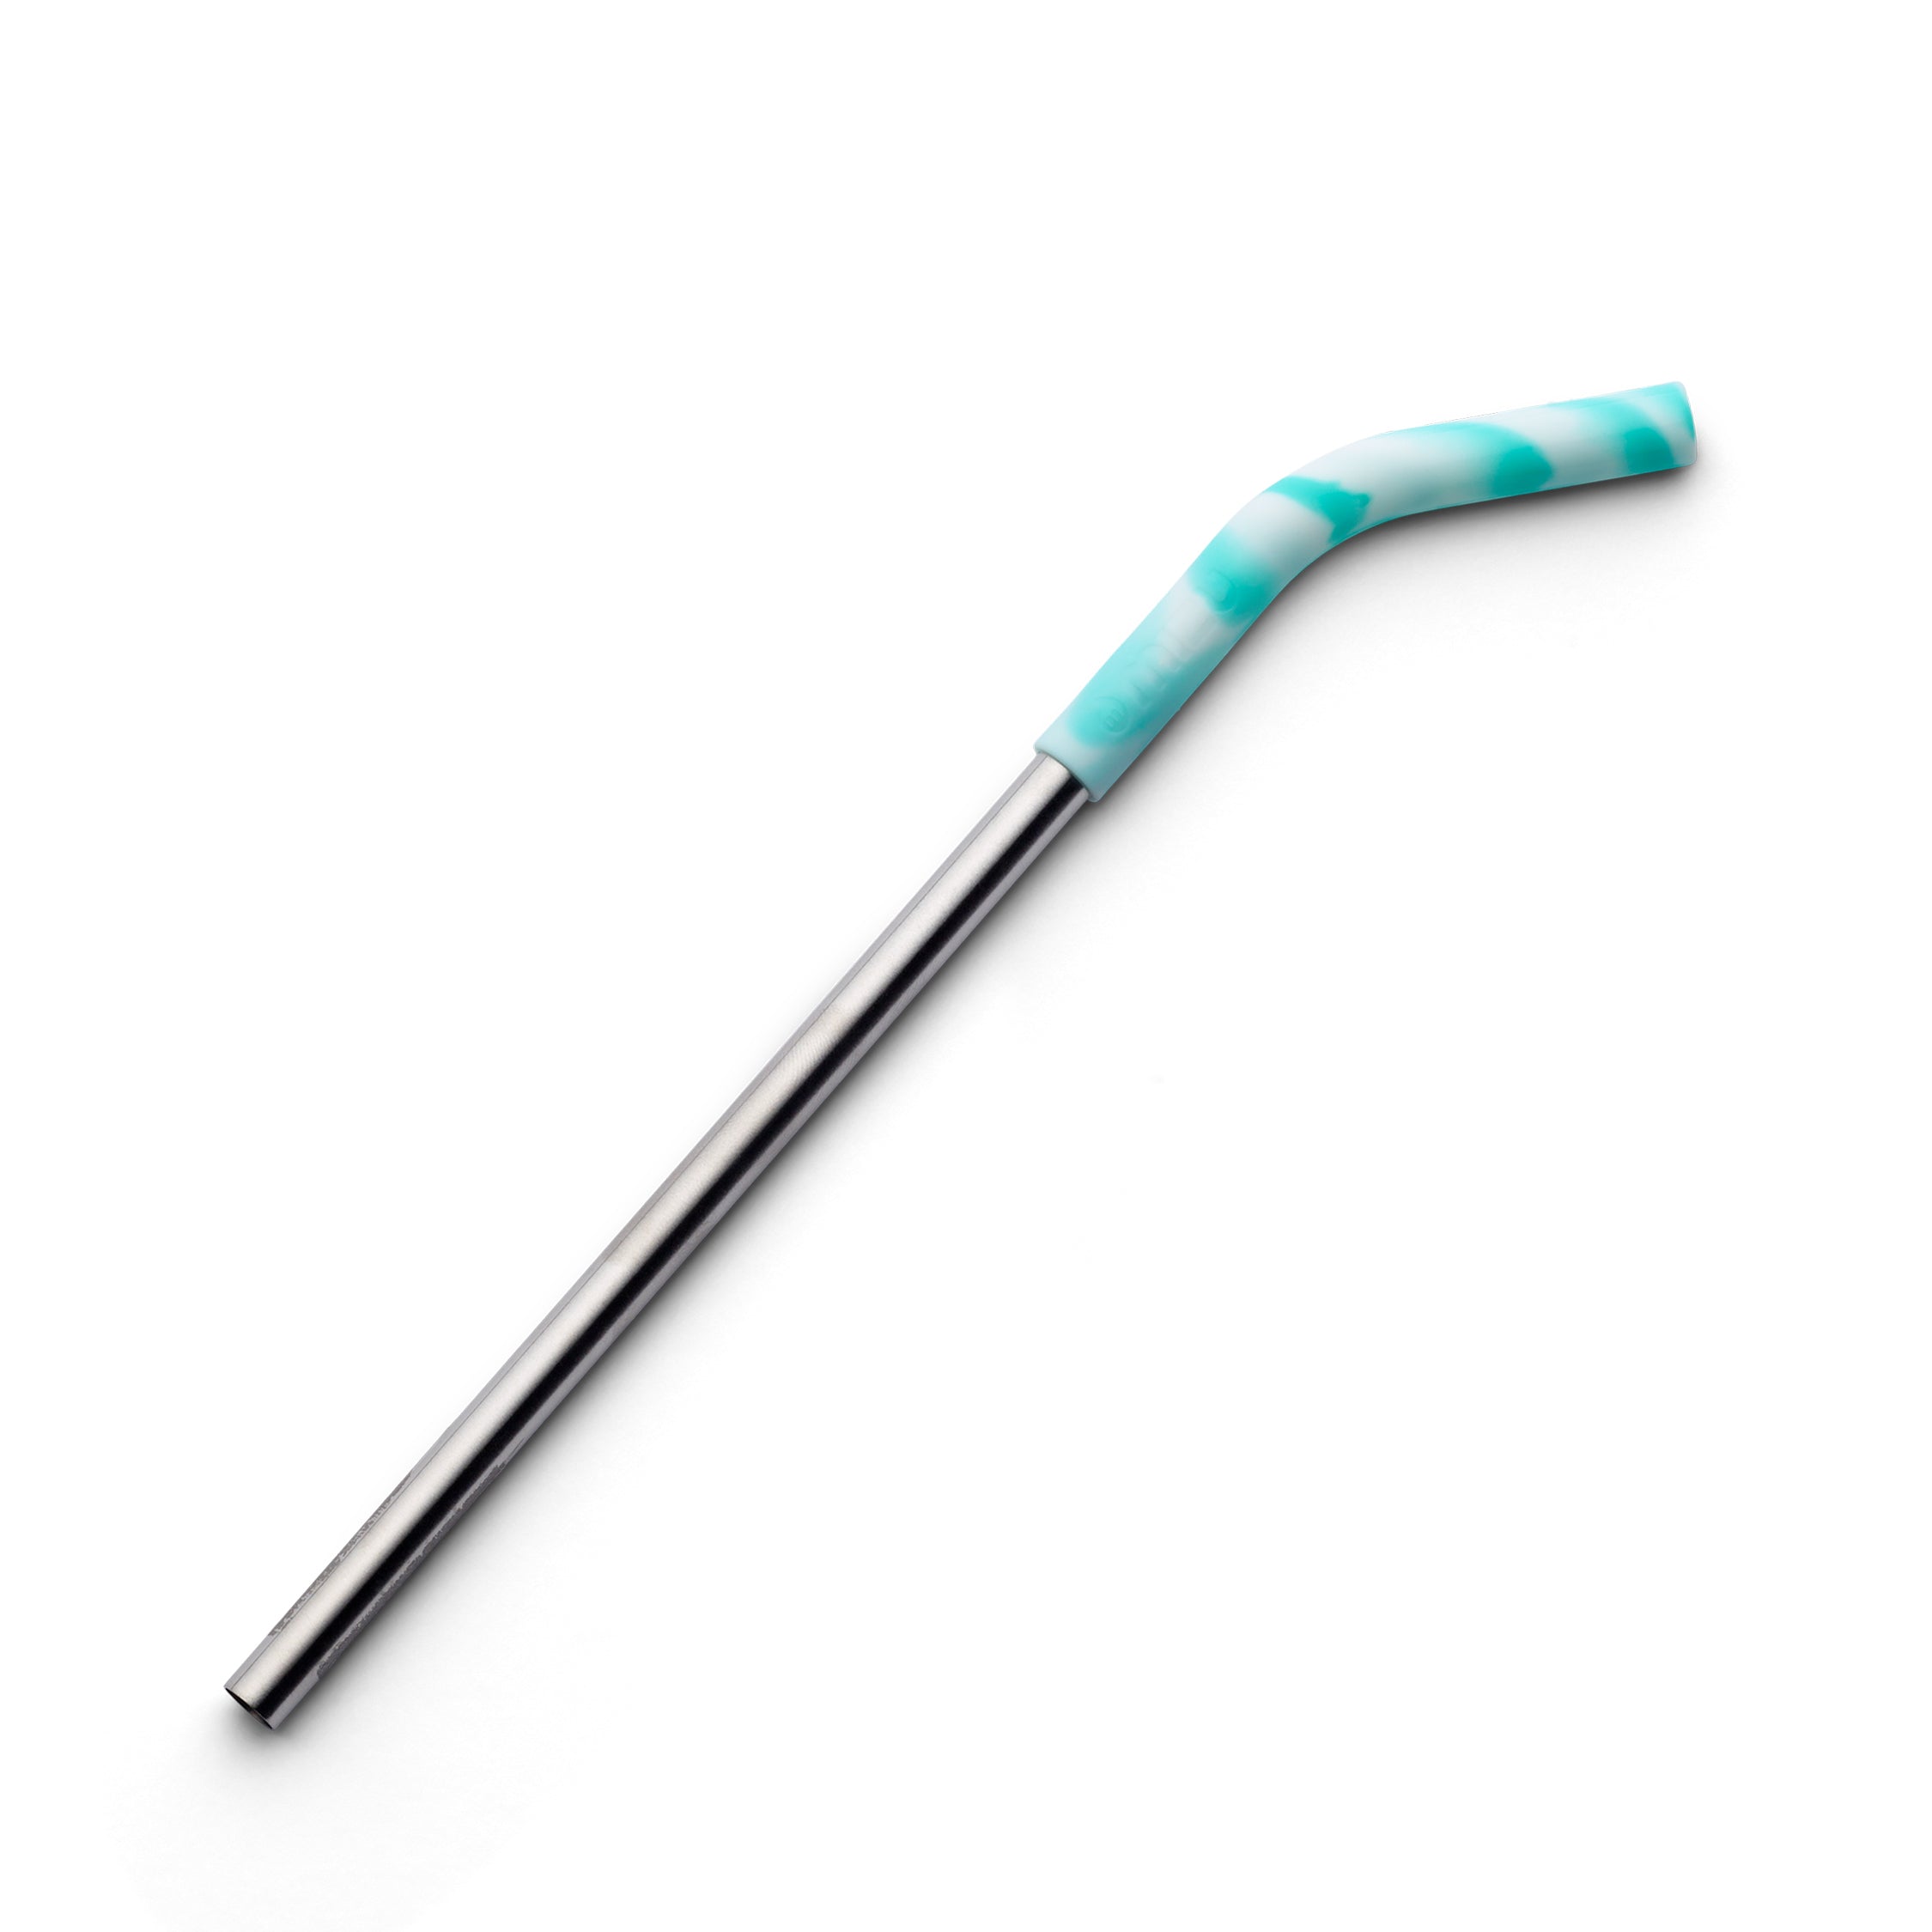 Mermaid Straw Silicone Tip for Stainless Steel Straw, 6mm - What's Good